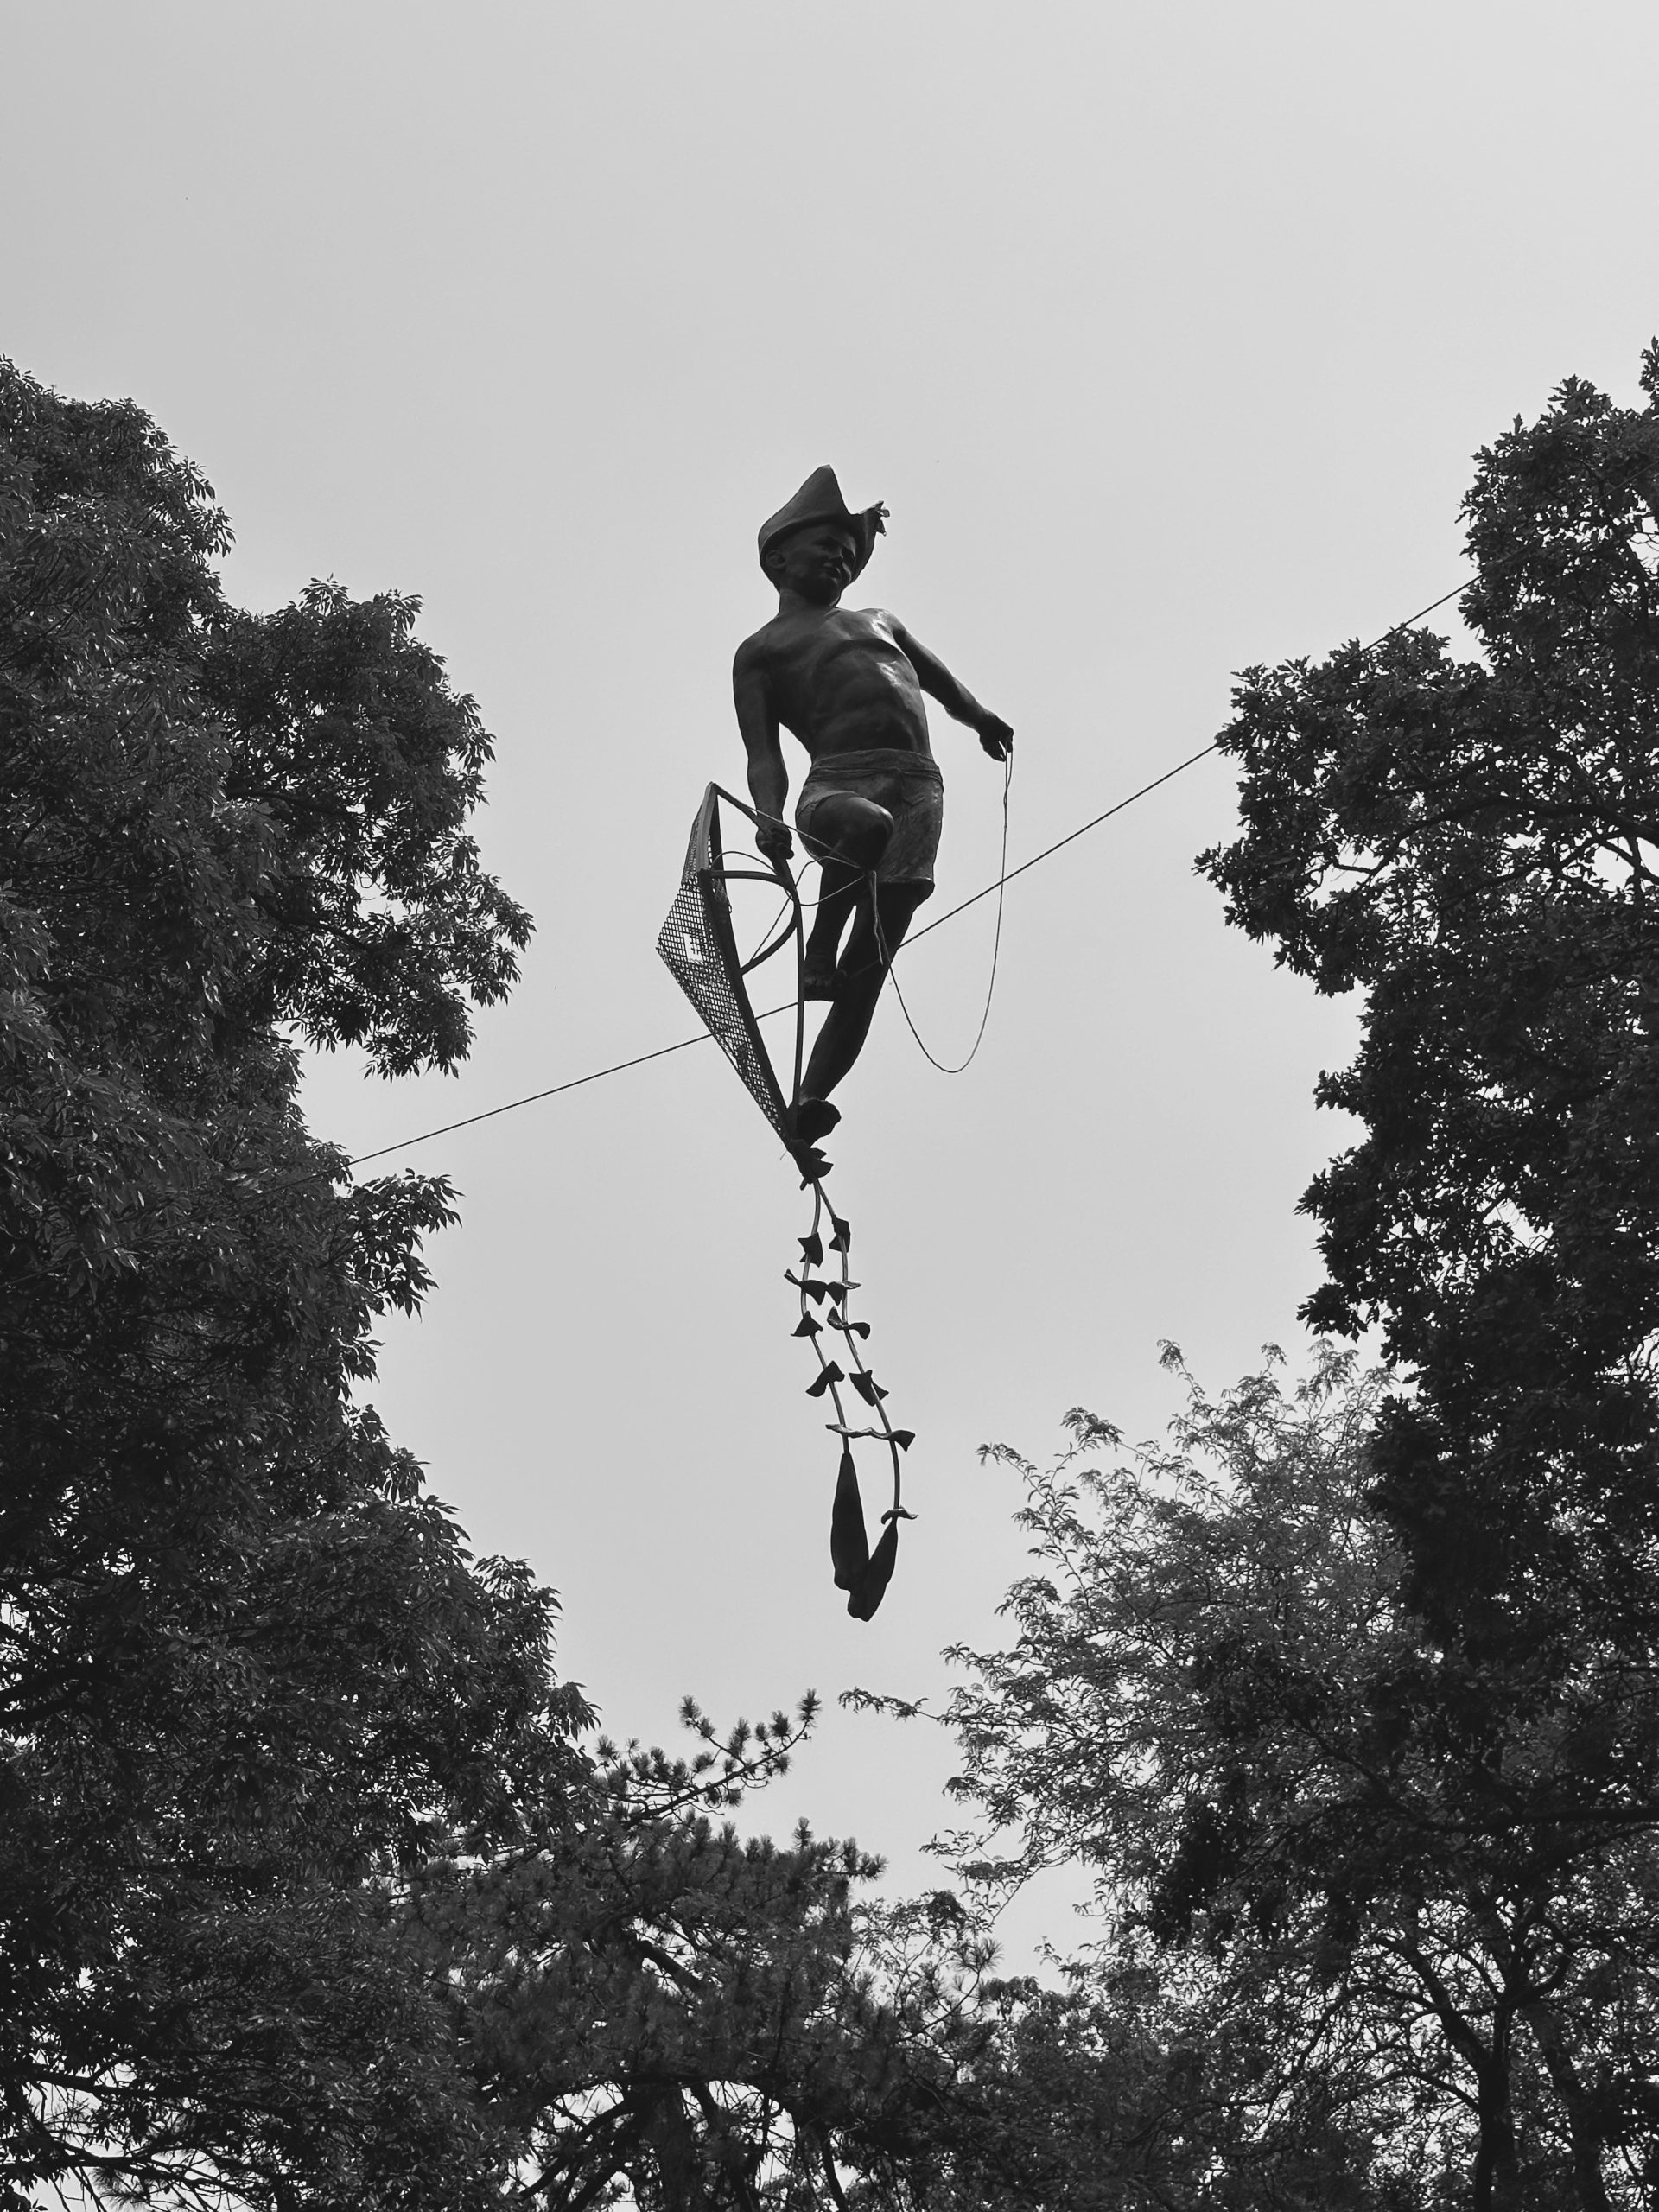 A statue of a boy holding a kite and wearing a hat is suspended in the air between two trees.